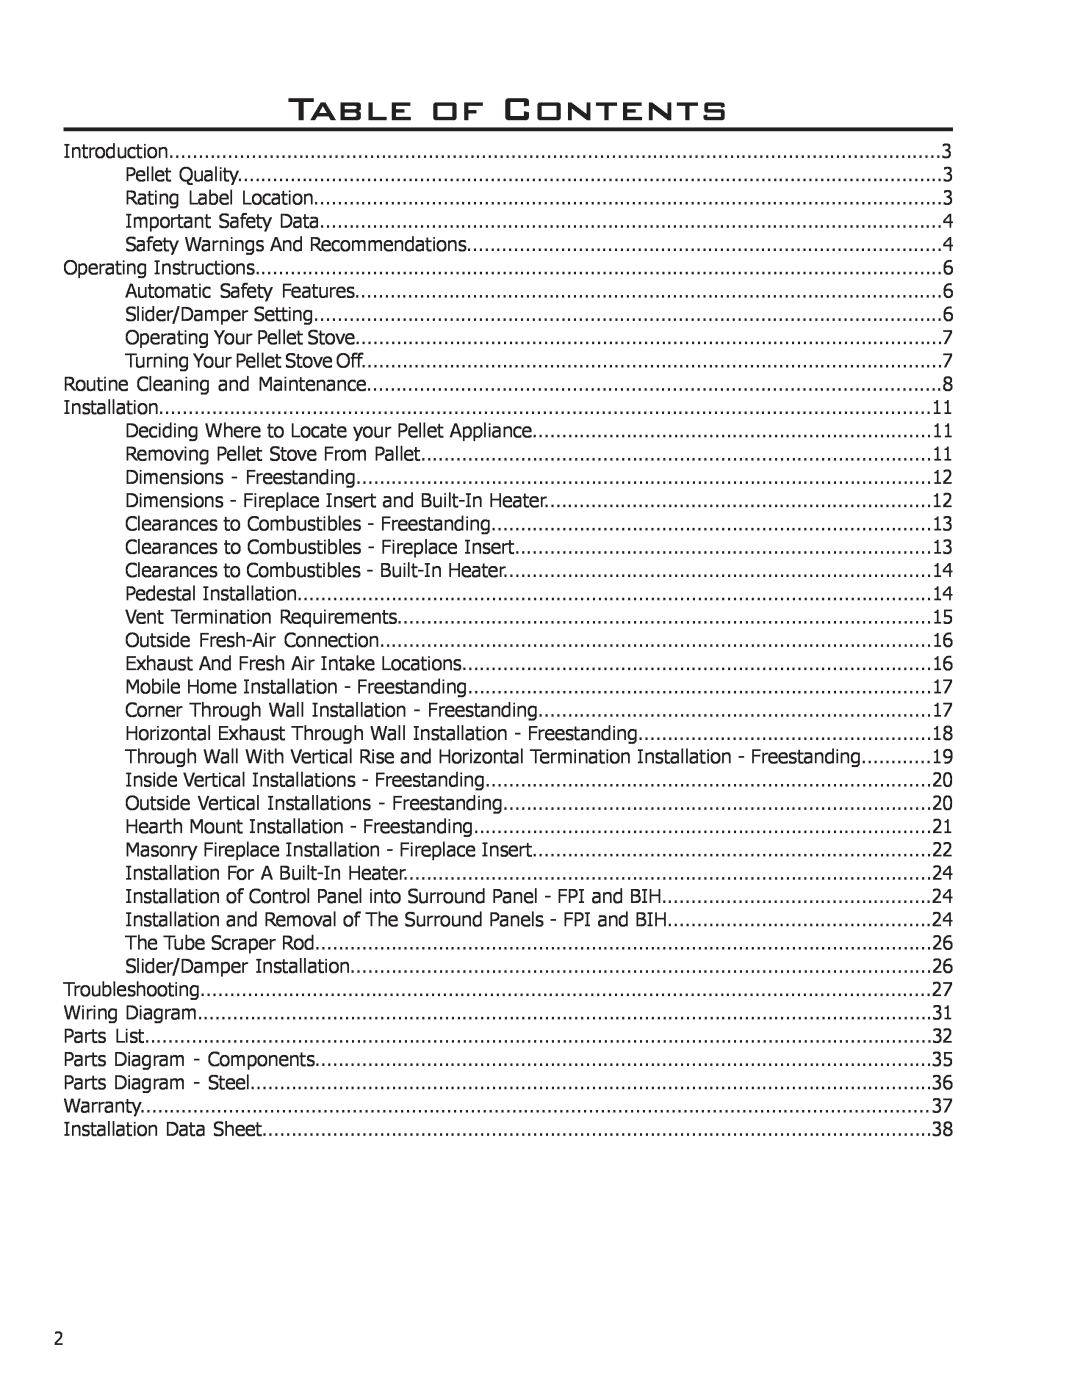 Enviro EF3 owner manual Table of Contents 